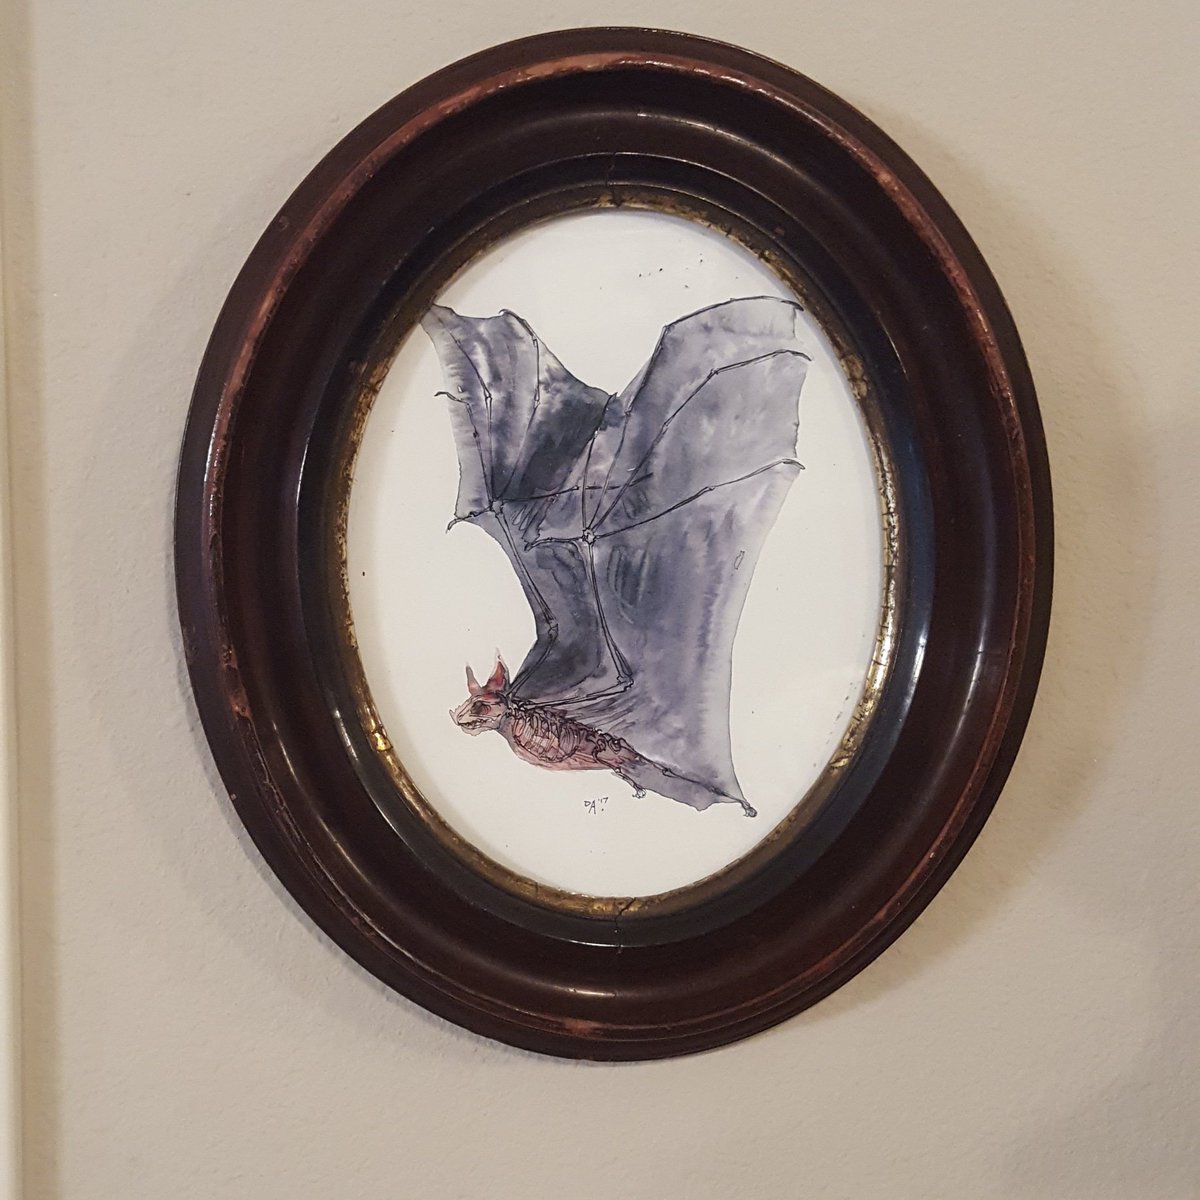 An antique frame I picked up ages ago. Finally got around to fixing up the back and hanging it up with some art, just in time for halloween!

#antiques #antiqueframe #bat #batdrawing #pictureframes #bones